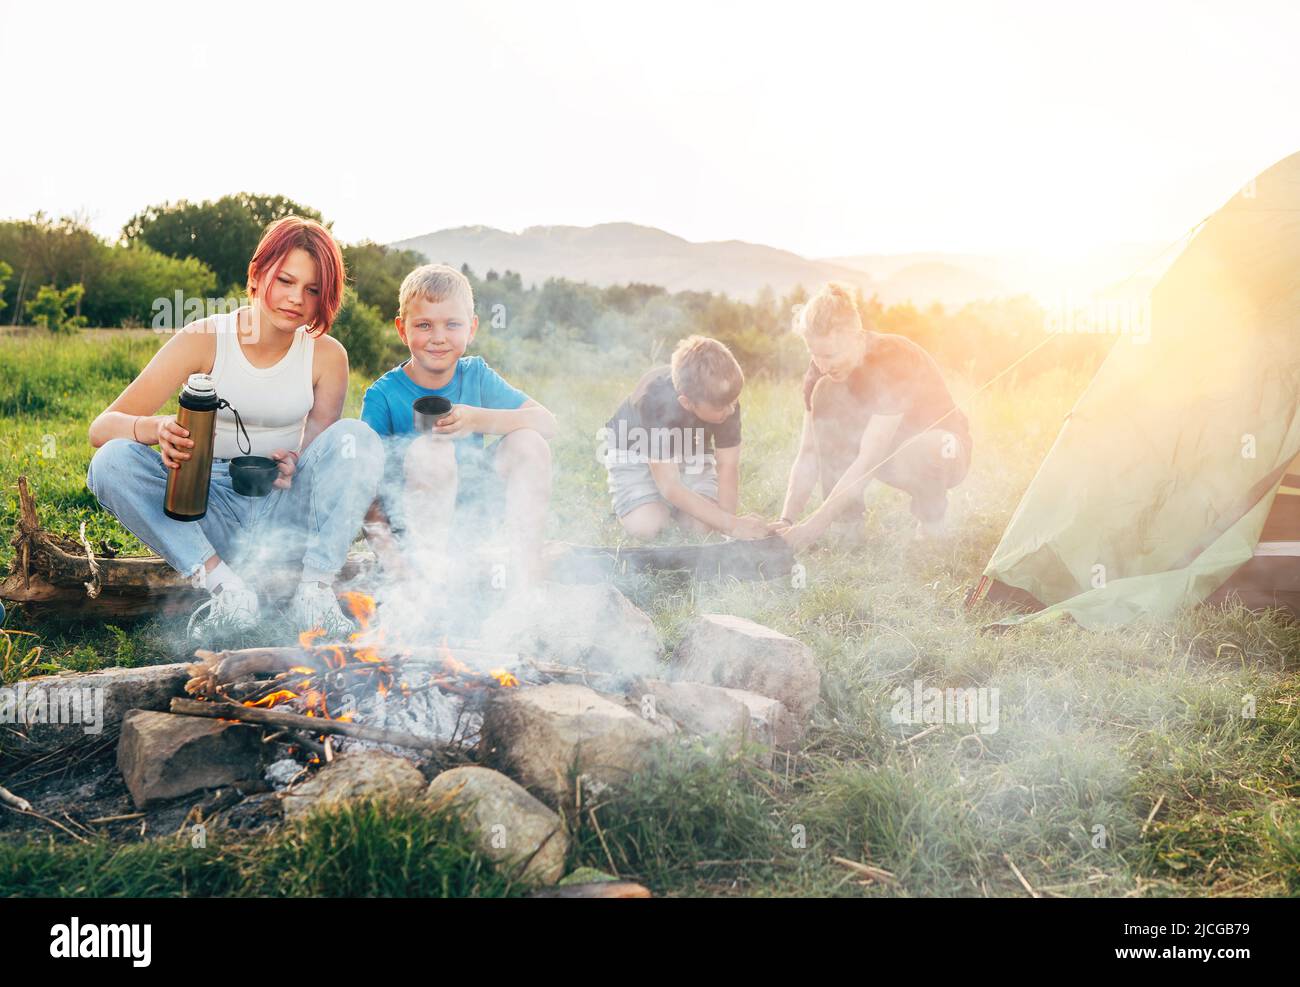 Group of smiling kids near a smoky campfire drinking tea from a thermos, two brothers set up the green tent. Happy family outdoor picnic camping activ Stock Photo